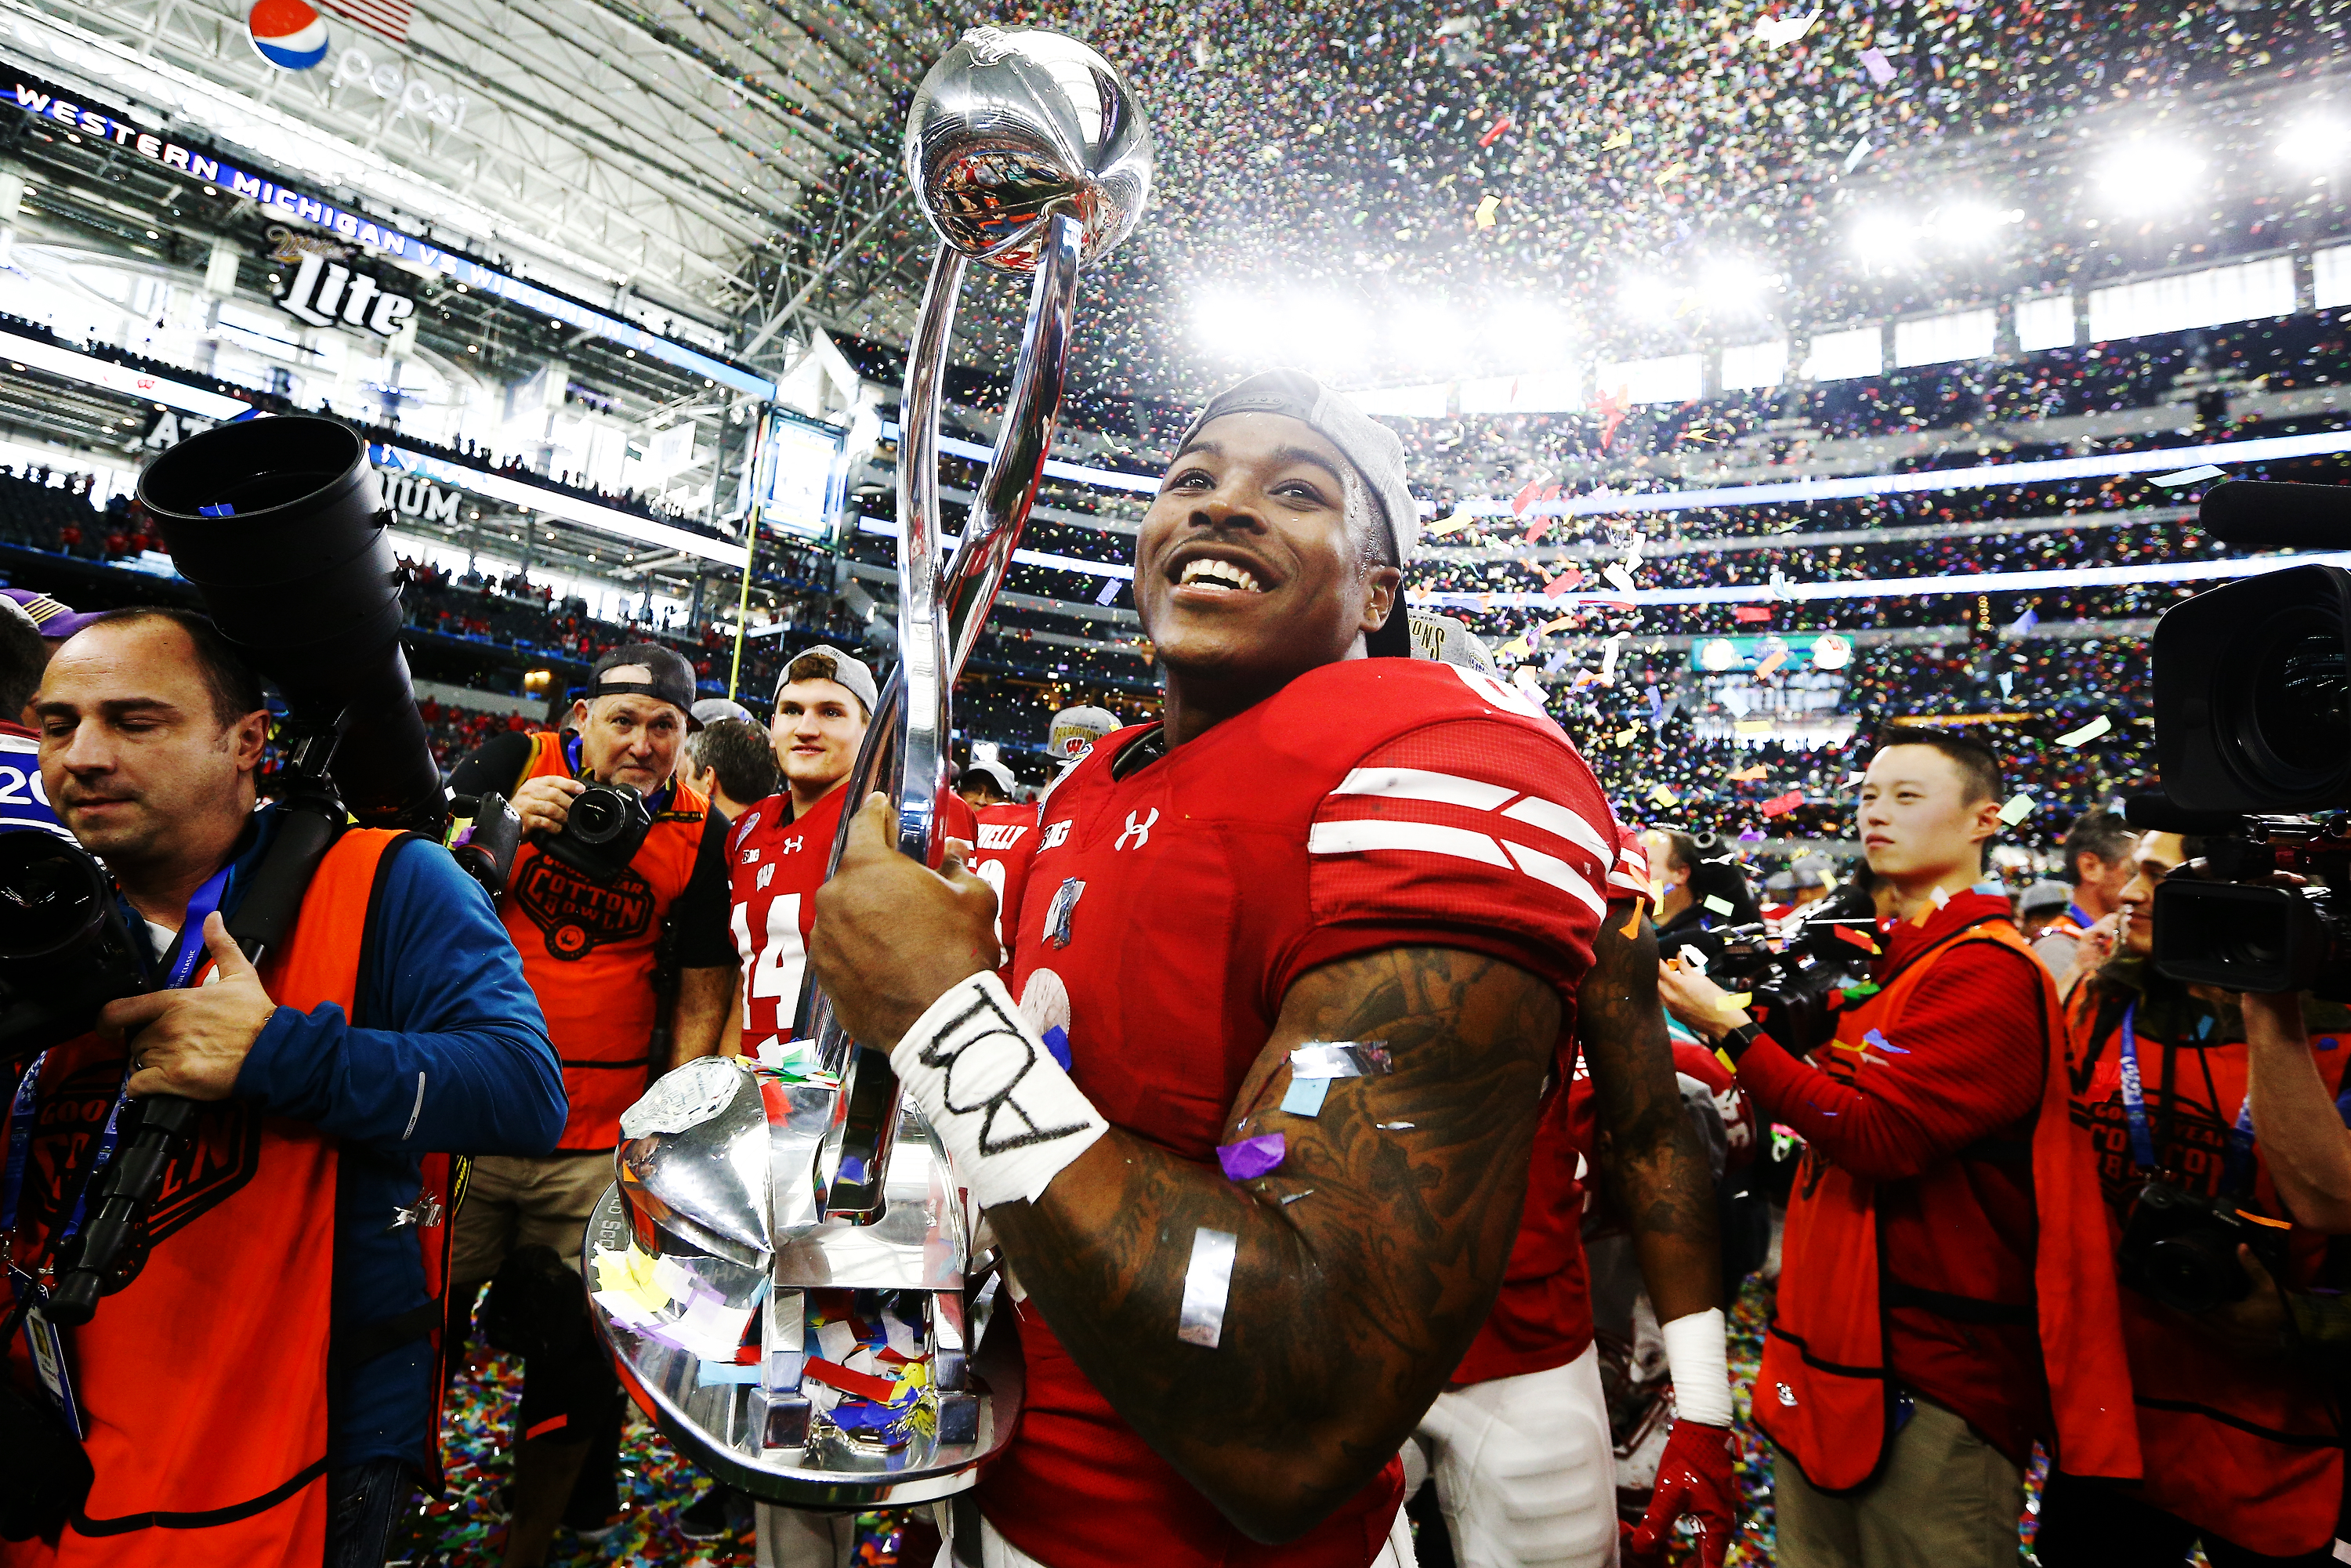 Wisconsin Badgers running back Corey Clement (6) holds the Cotton Bowl trophy after defeating Western Michigan 24-16 in the 81st Annual Goodyear Cotton Bowl Classic between Western Michigan and Wisconsin at AT&T Stadium in Arlington, TX on January 2, 2017.